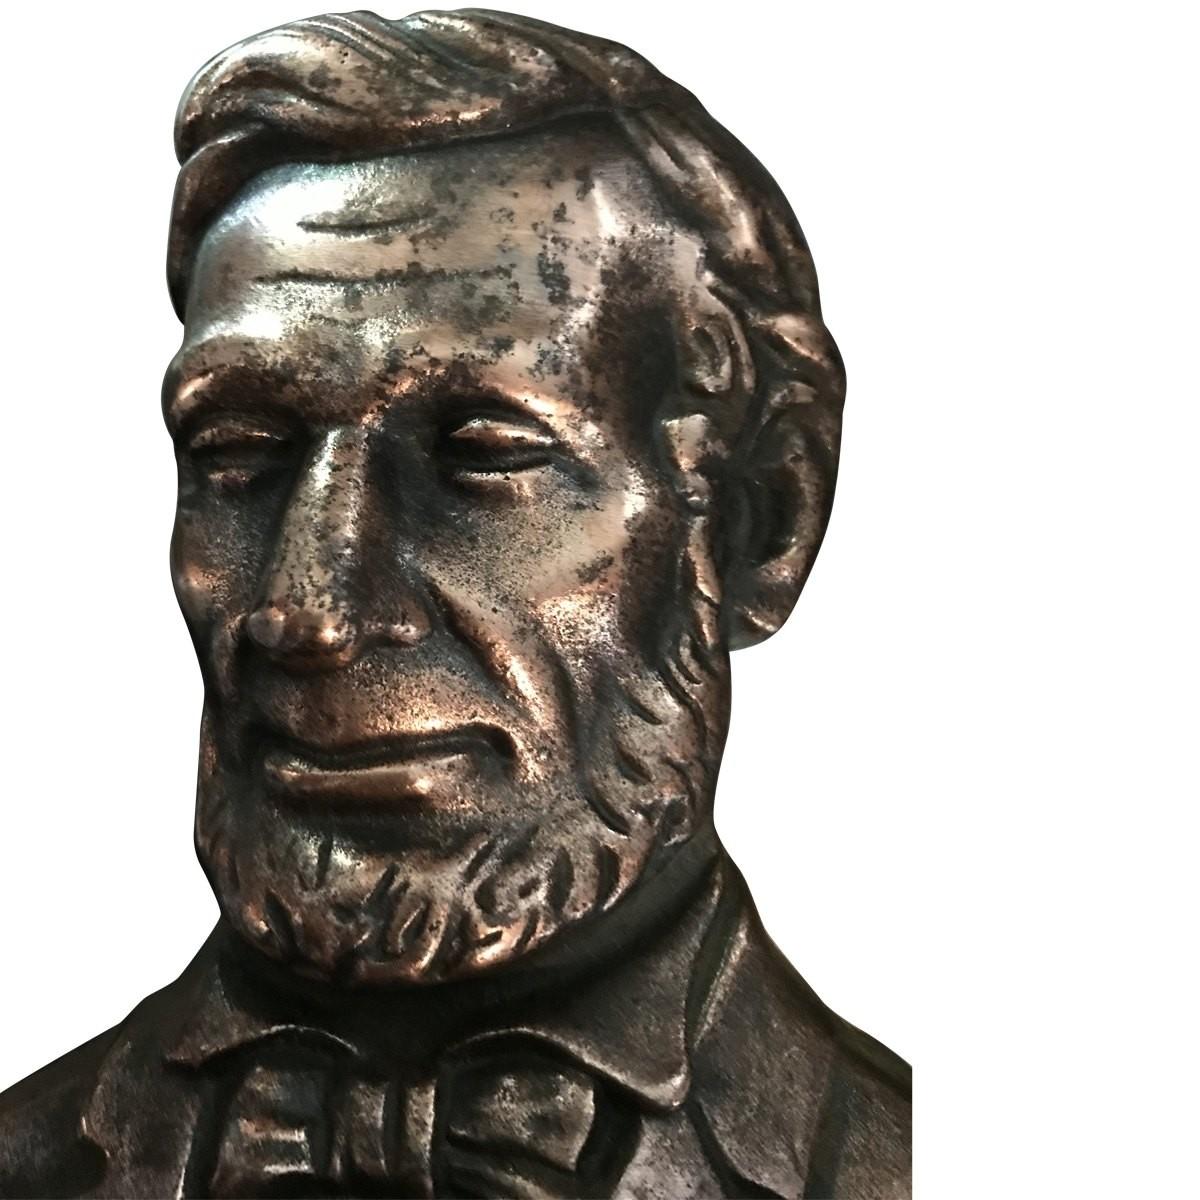 Pair of  Vintage design  unique  This presidential pair of bookends is the one and only Abraham Lincoln. This carved bust-style set is created in copper-toned cast iron. This set will add a quirky, yet stately touch to any book collection.
